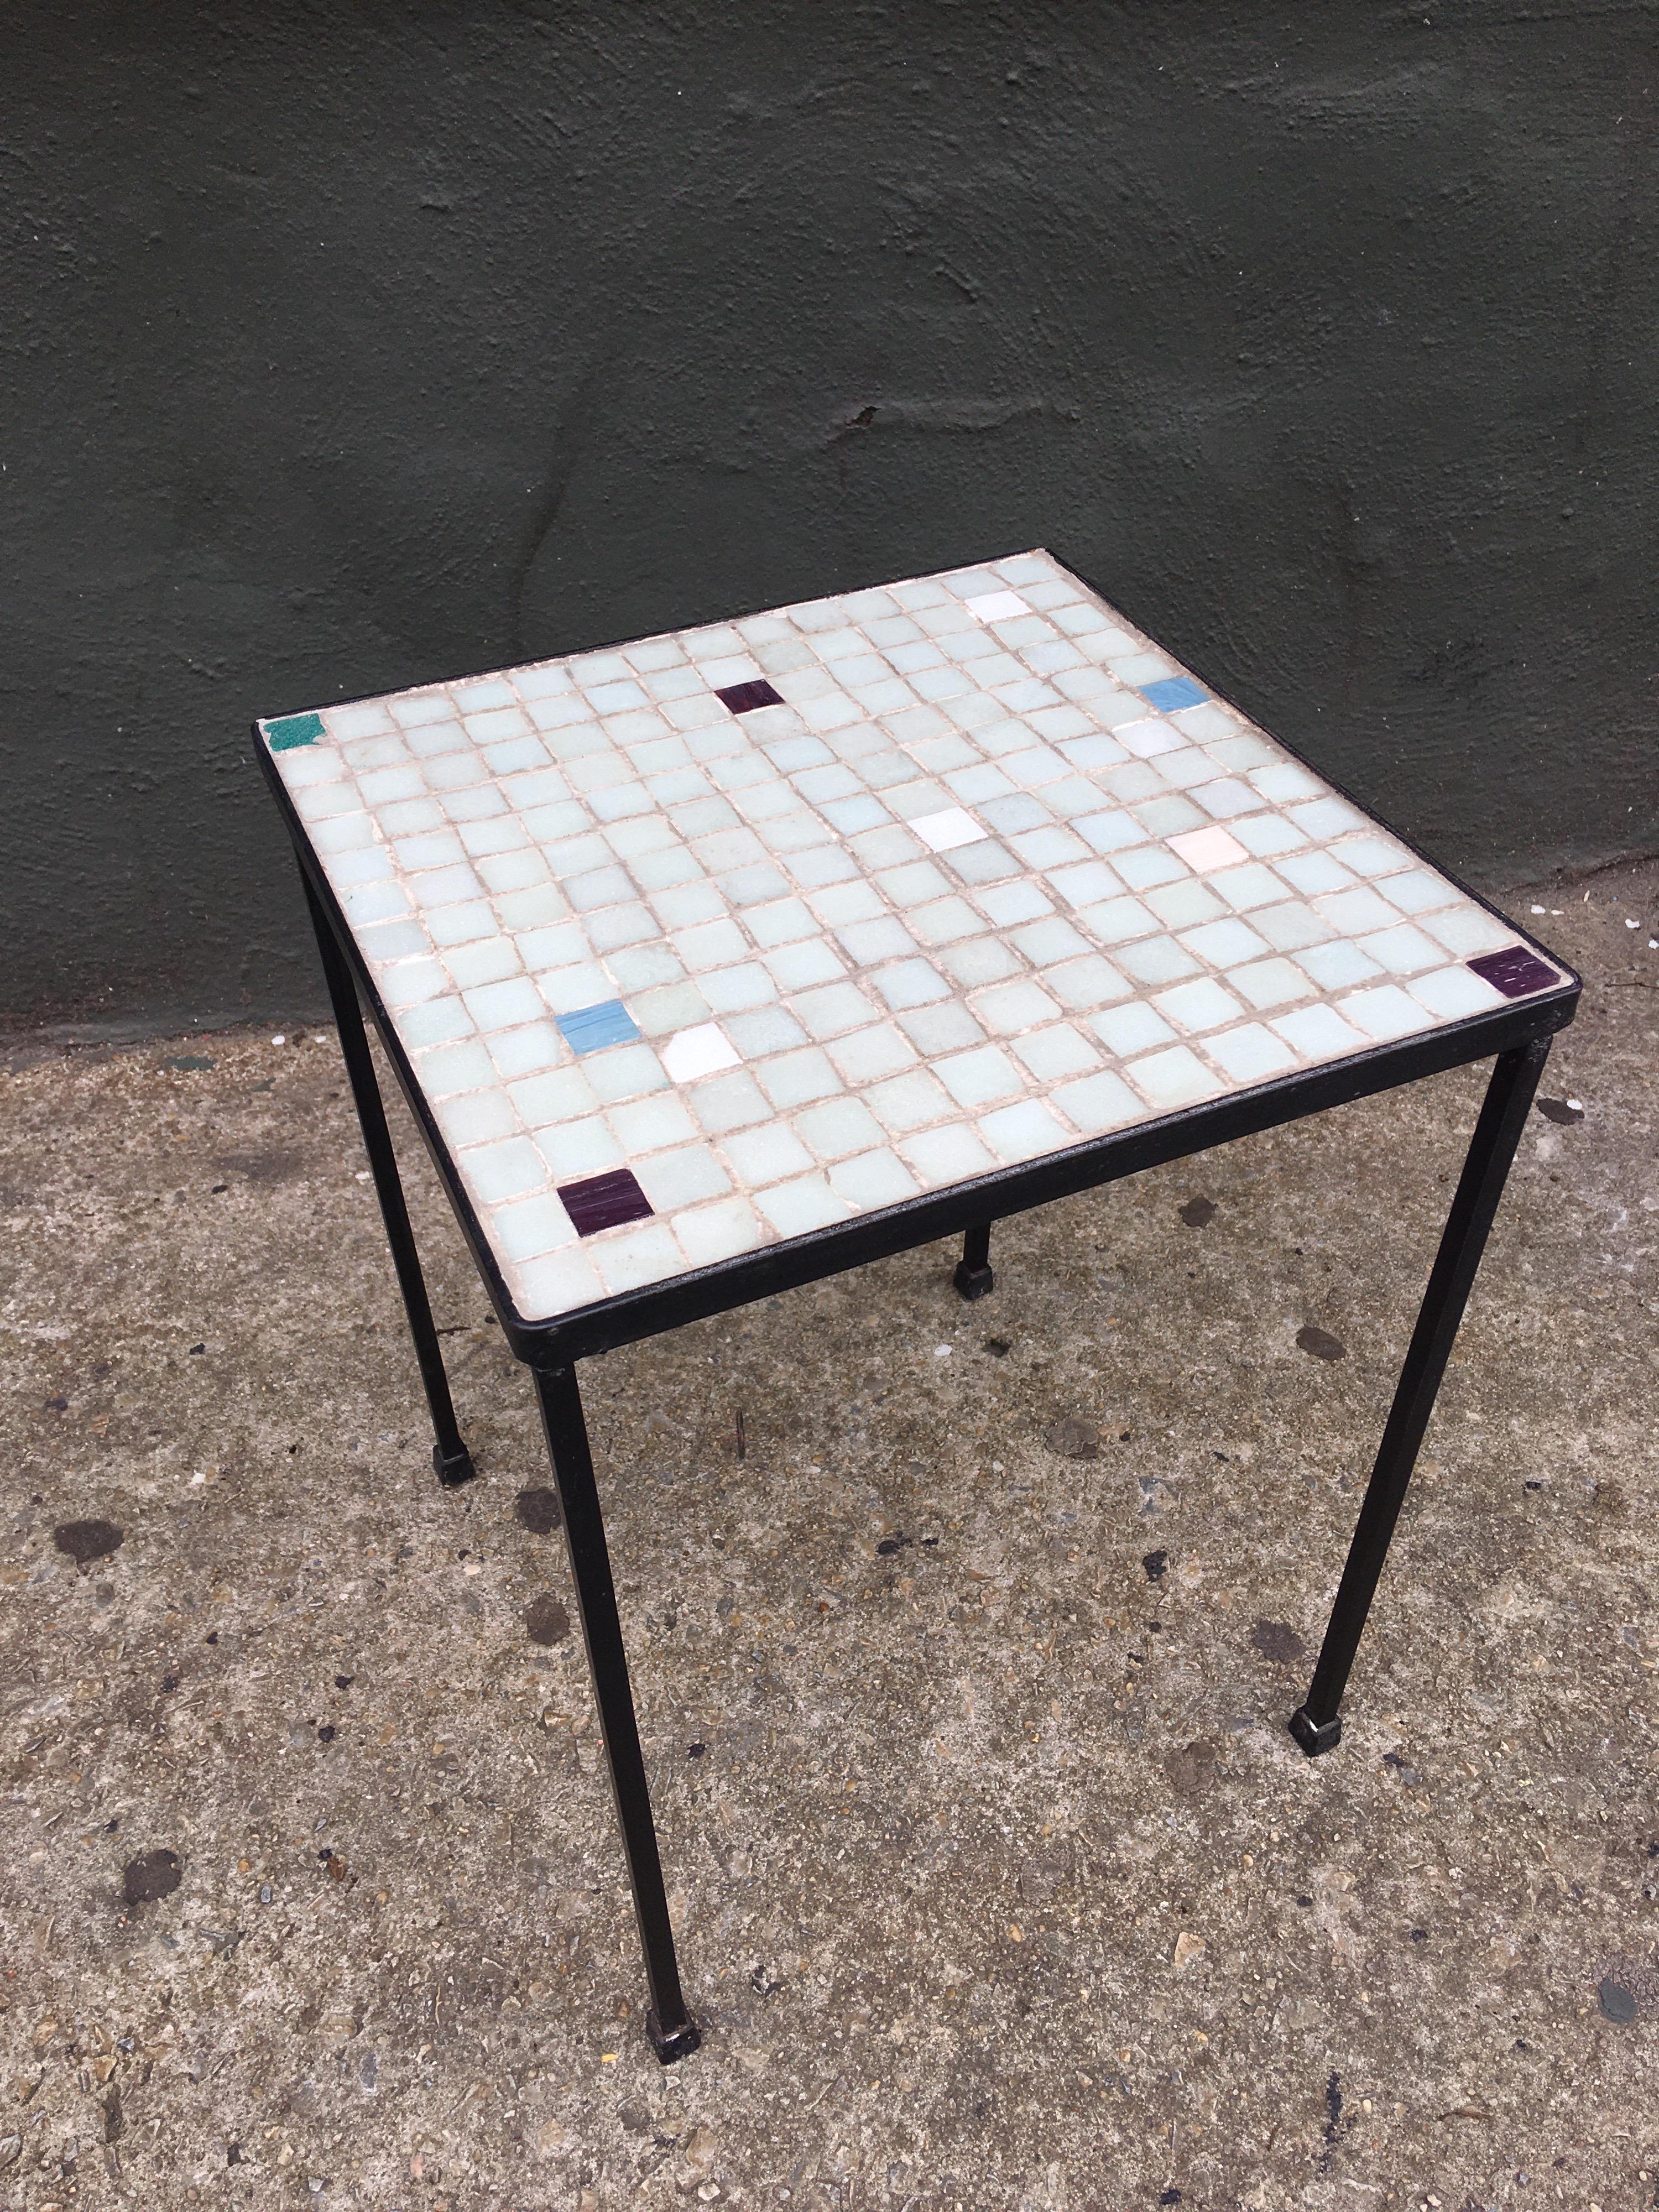 Single wrought iron table with Italian glass tiles. I've seen these attributed to being imported by Raymor. Perfect little table for drinks or morning coffee!